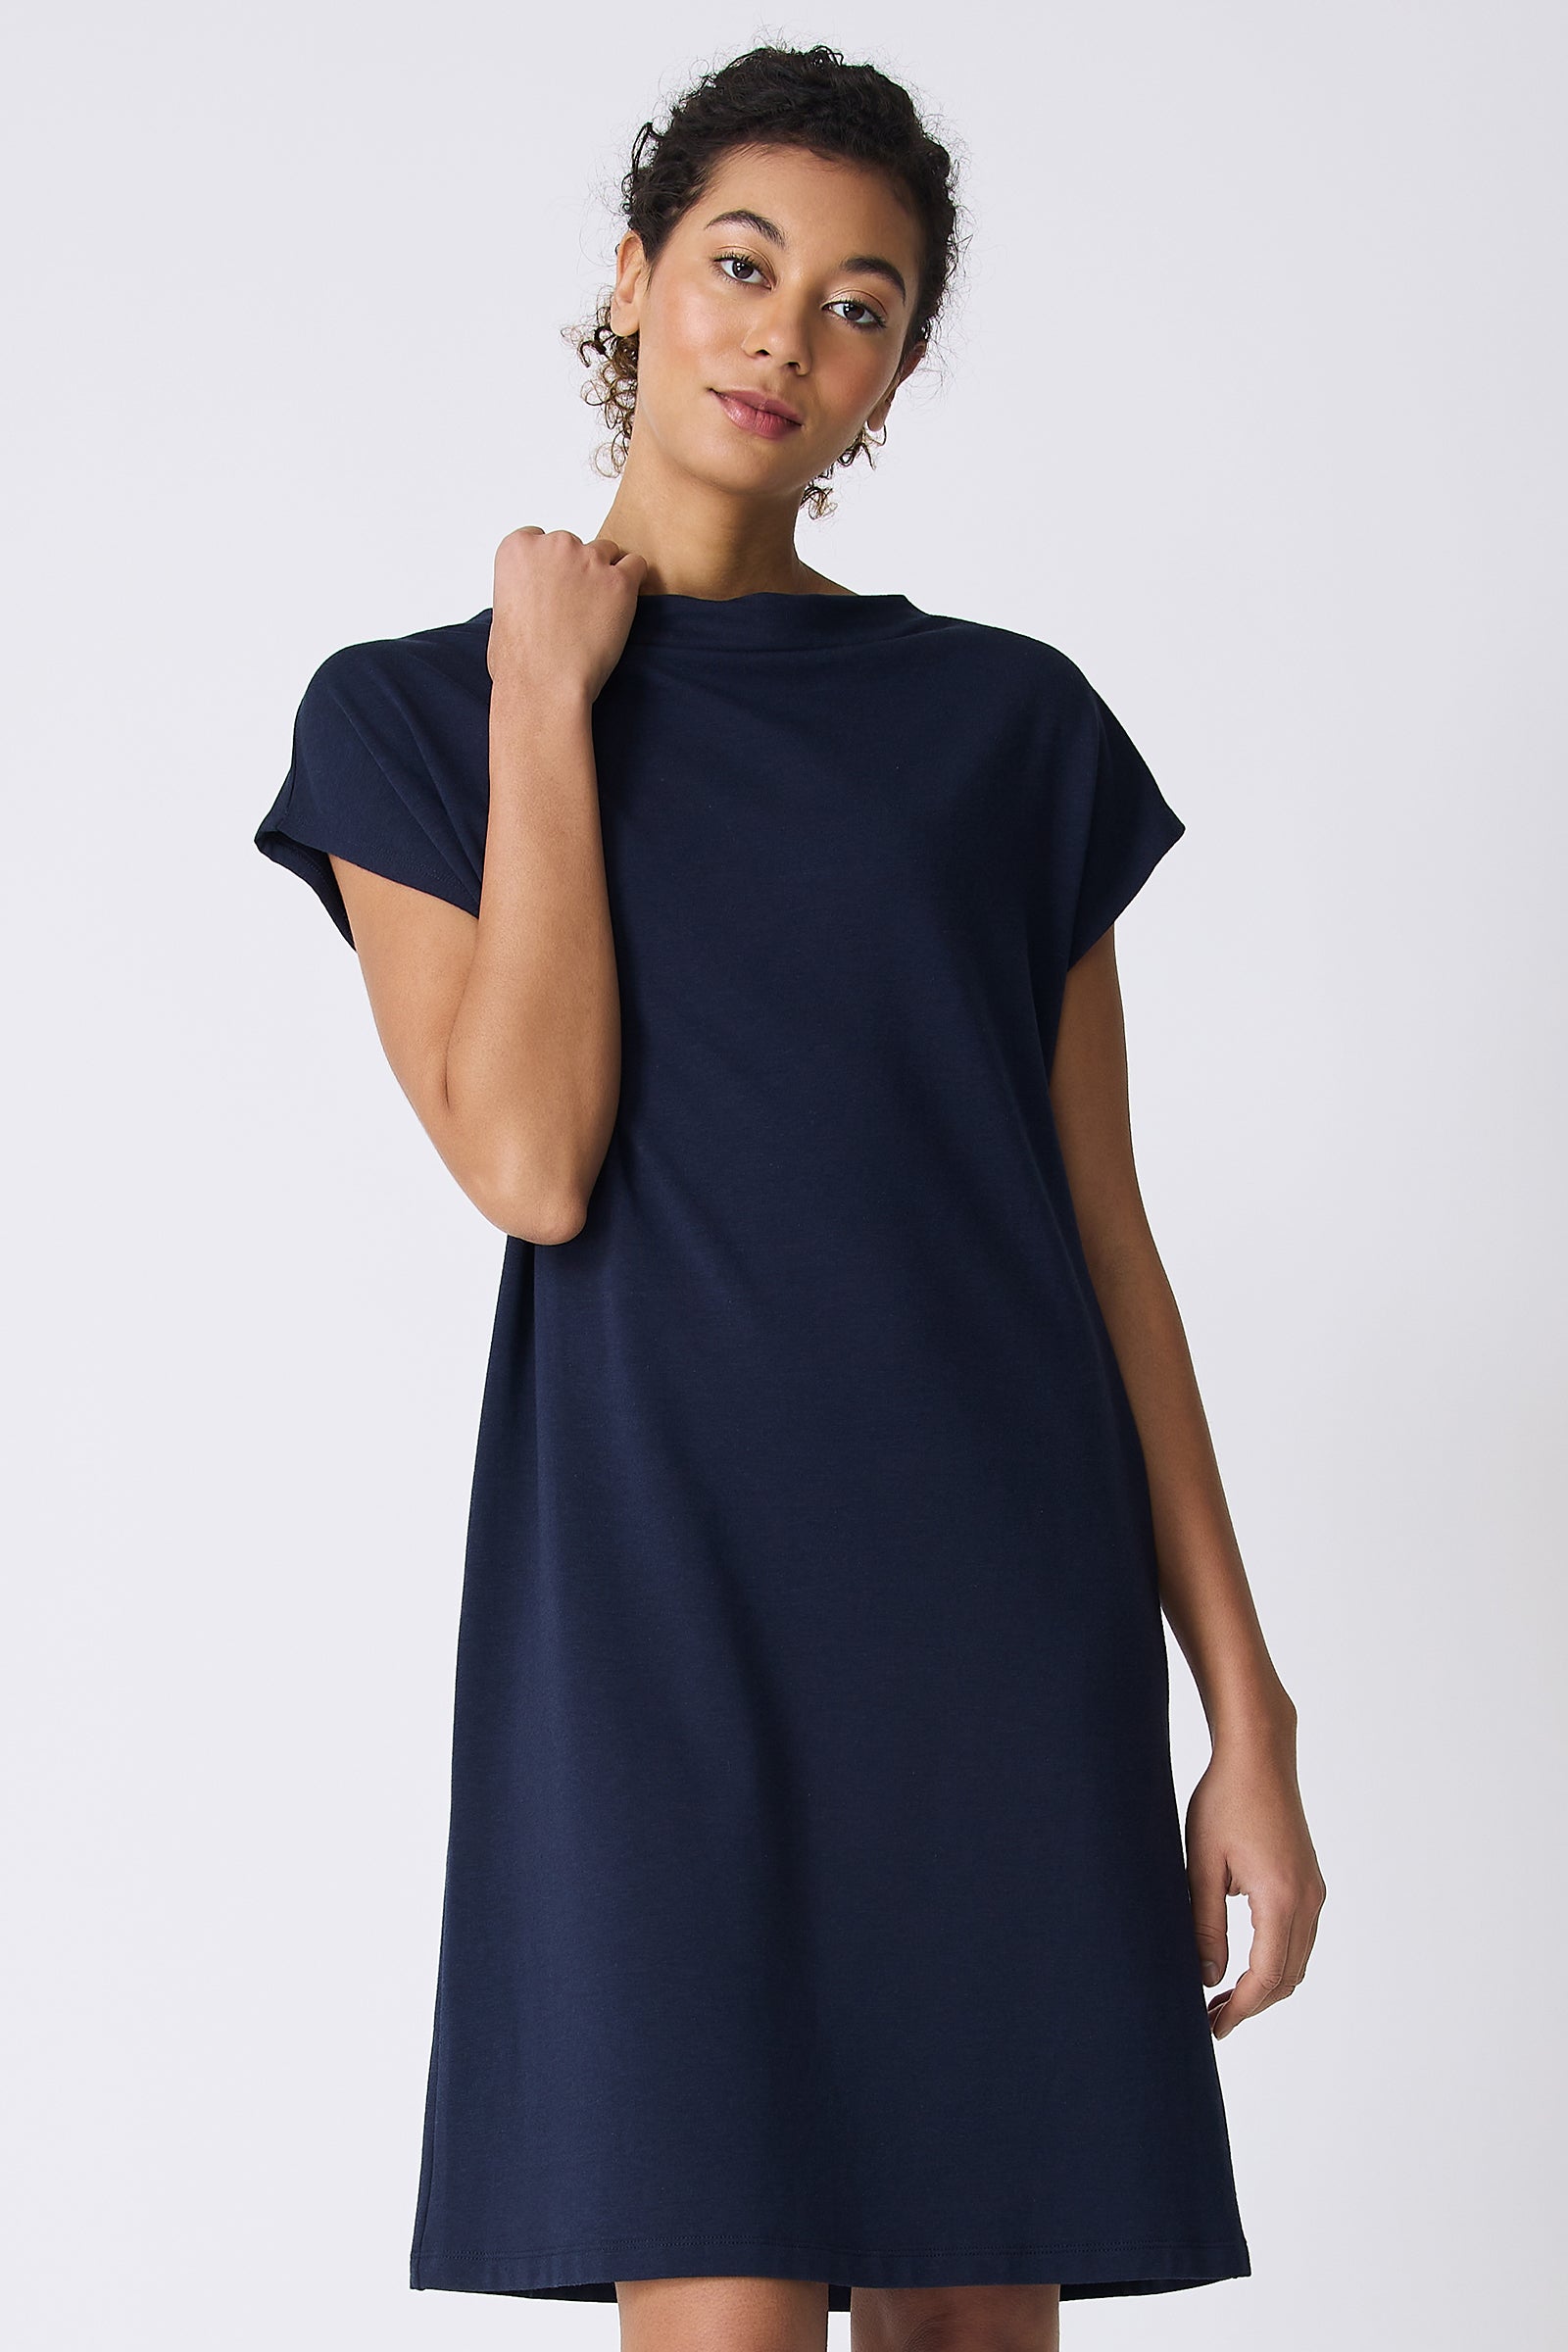 Kal Rieman Luca Cowl Dress in Navy on model touching collar front view